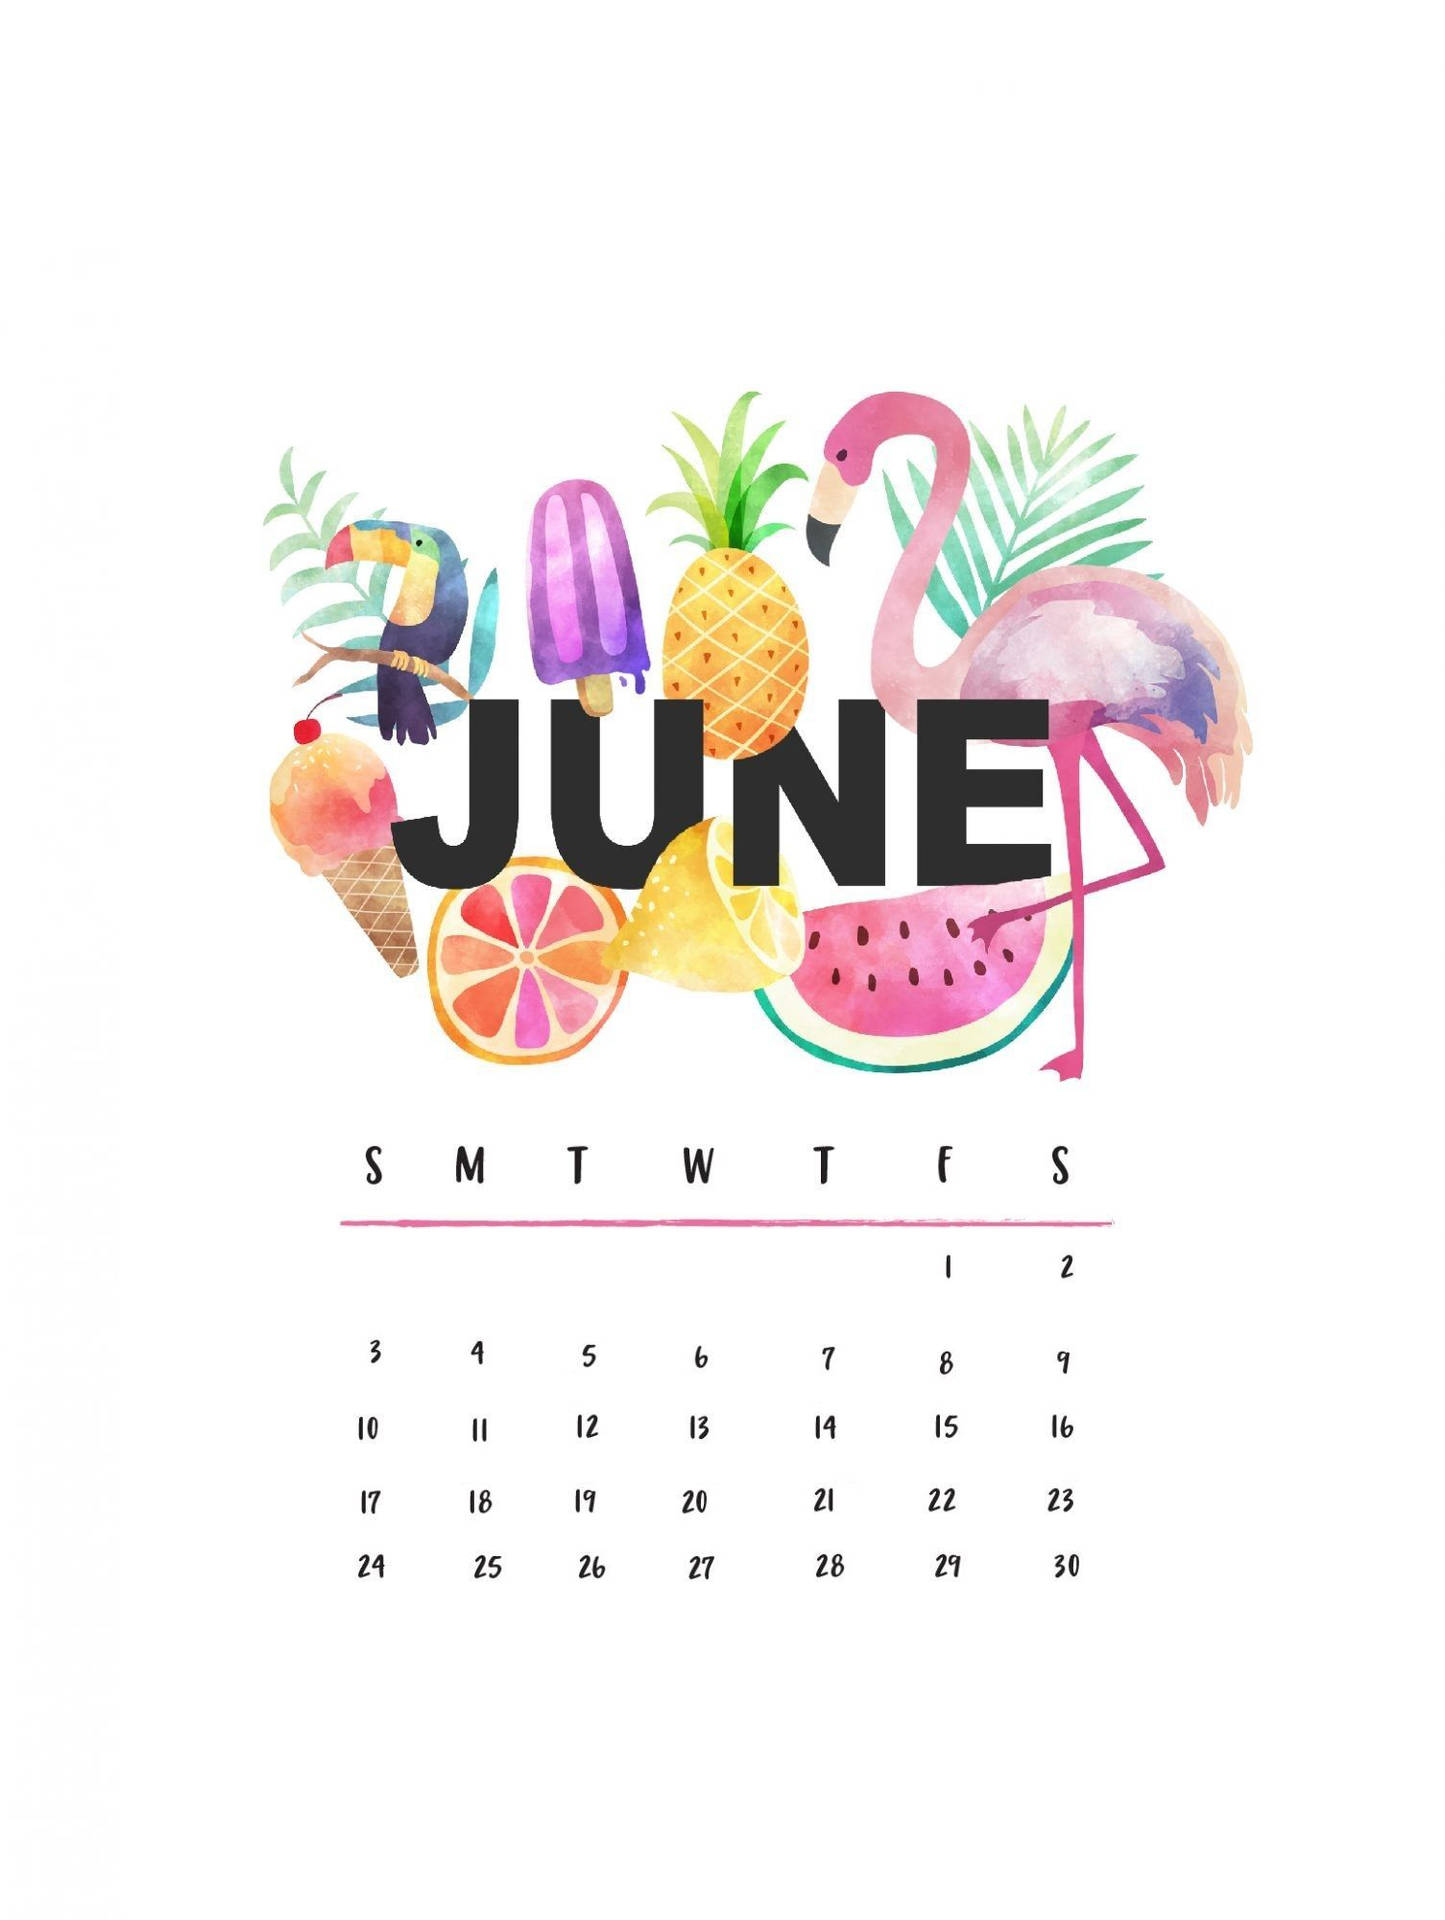 Get Inspired to Welcome June with a Colorful Summer Calendar! Wallpaper